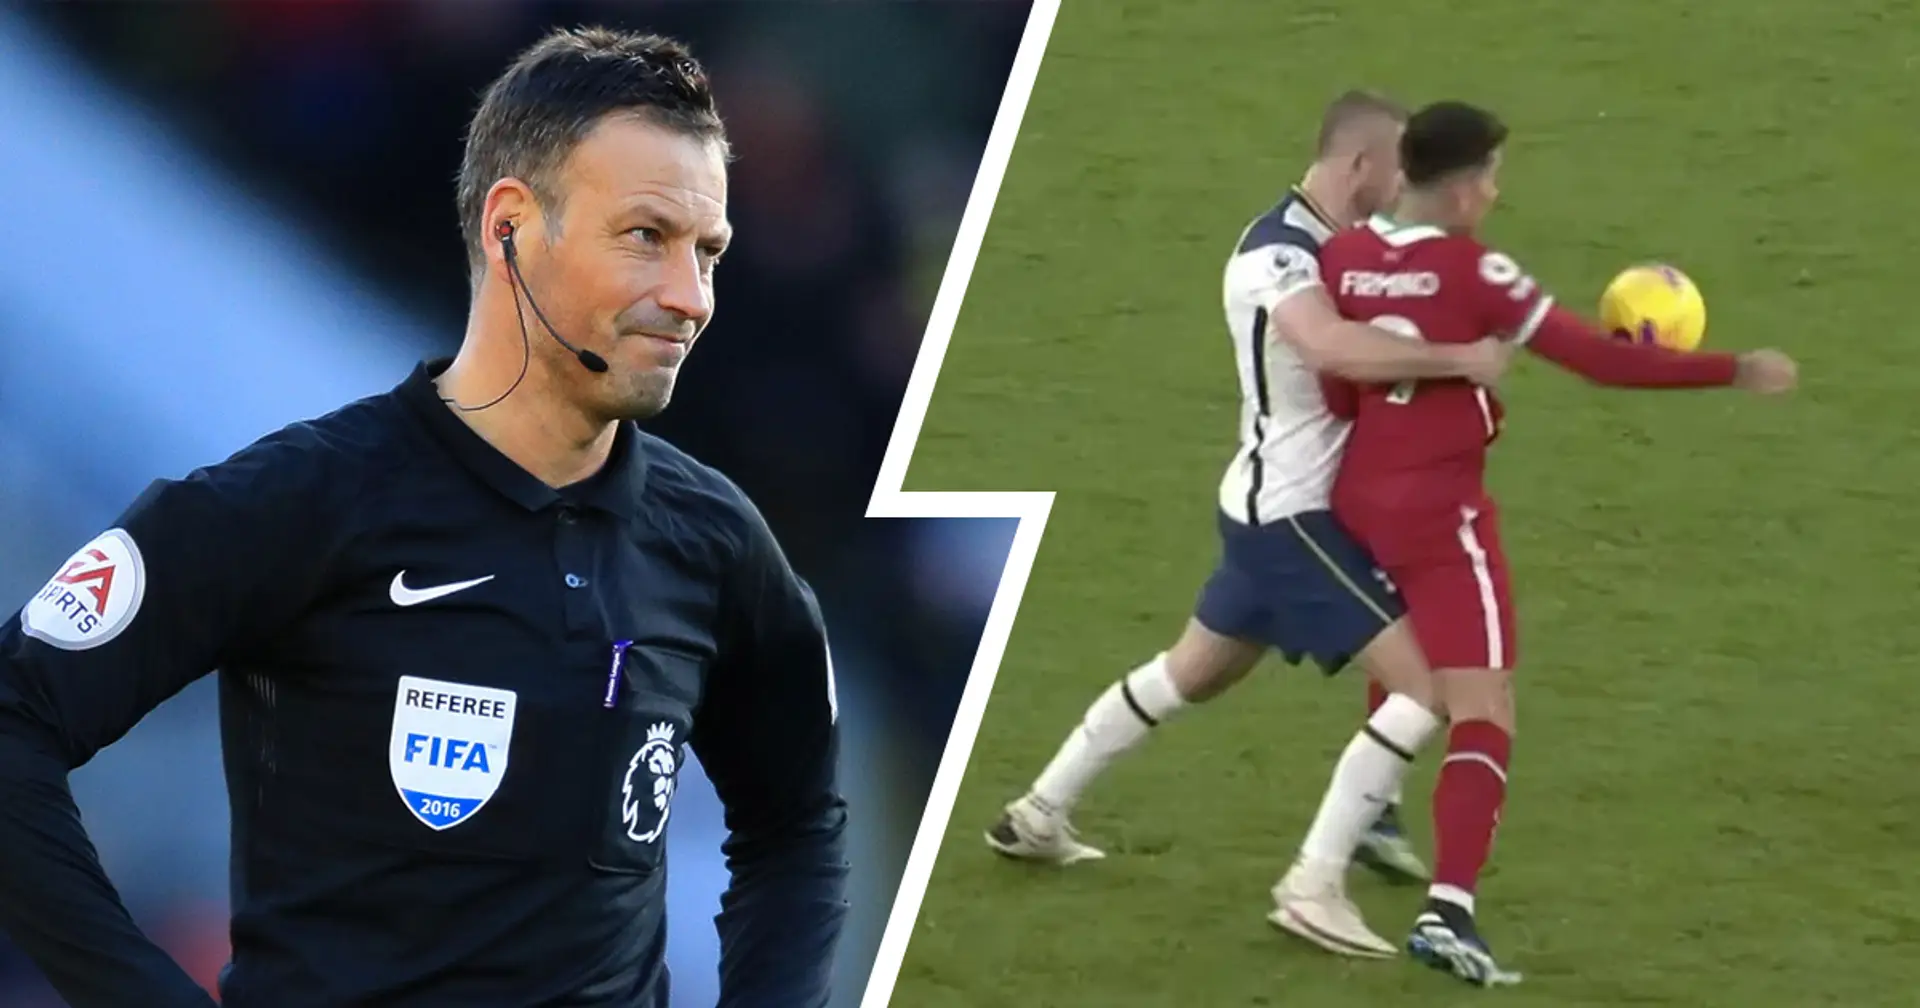 Mark Clattenburg at it again: ex-PL referee agrees with controversial VAR call to disallow Mo Salah's goal